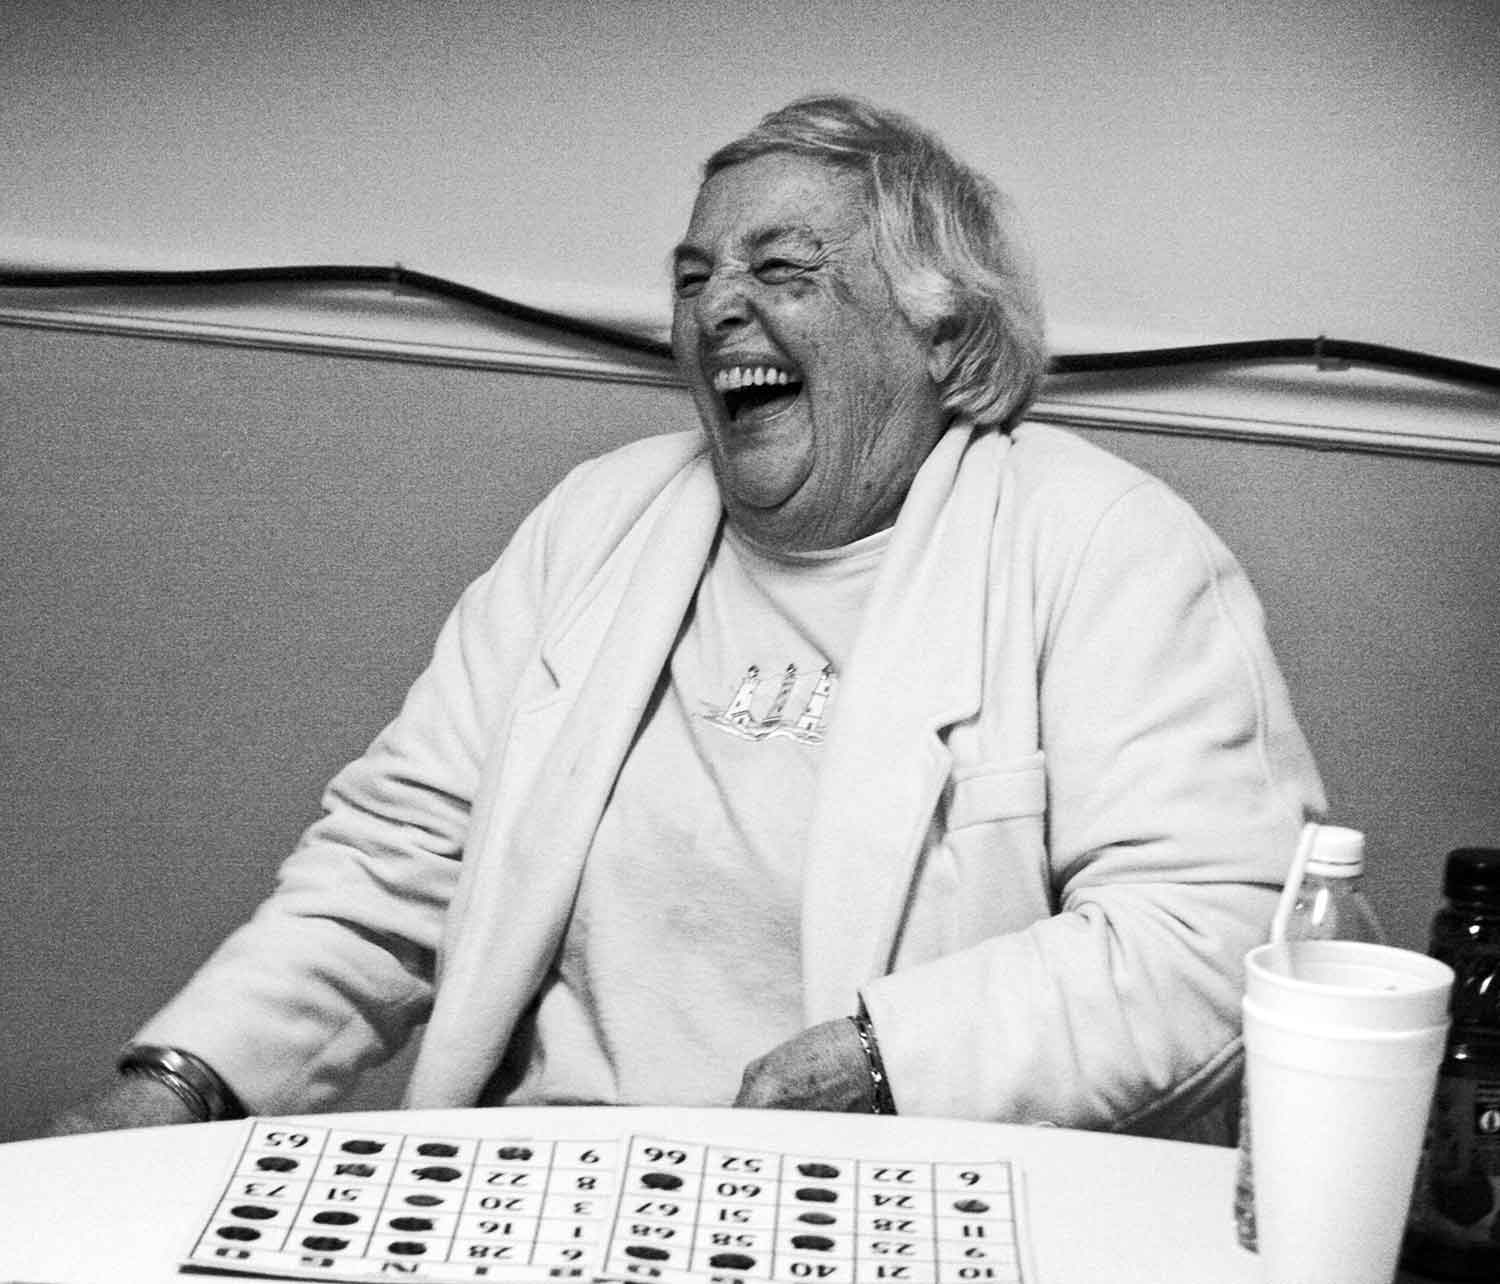 Janice Burris laughs off one of several false wins during a bingo game at the LaFollette Senior Center. photo by Anne Whitworth - 2009